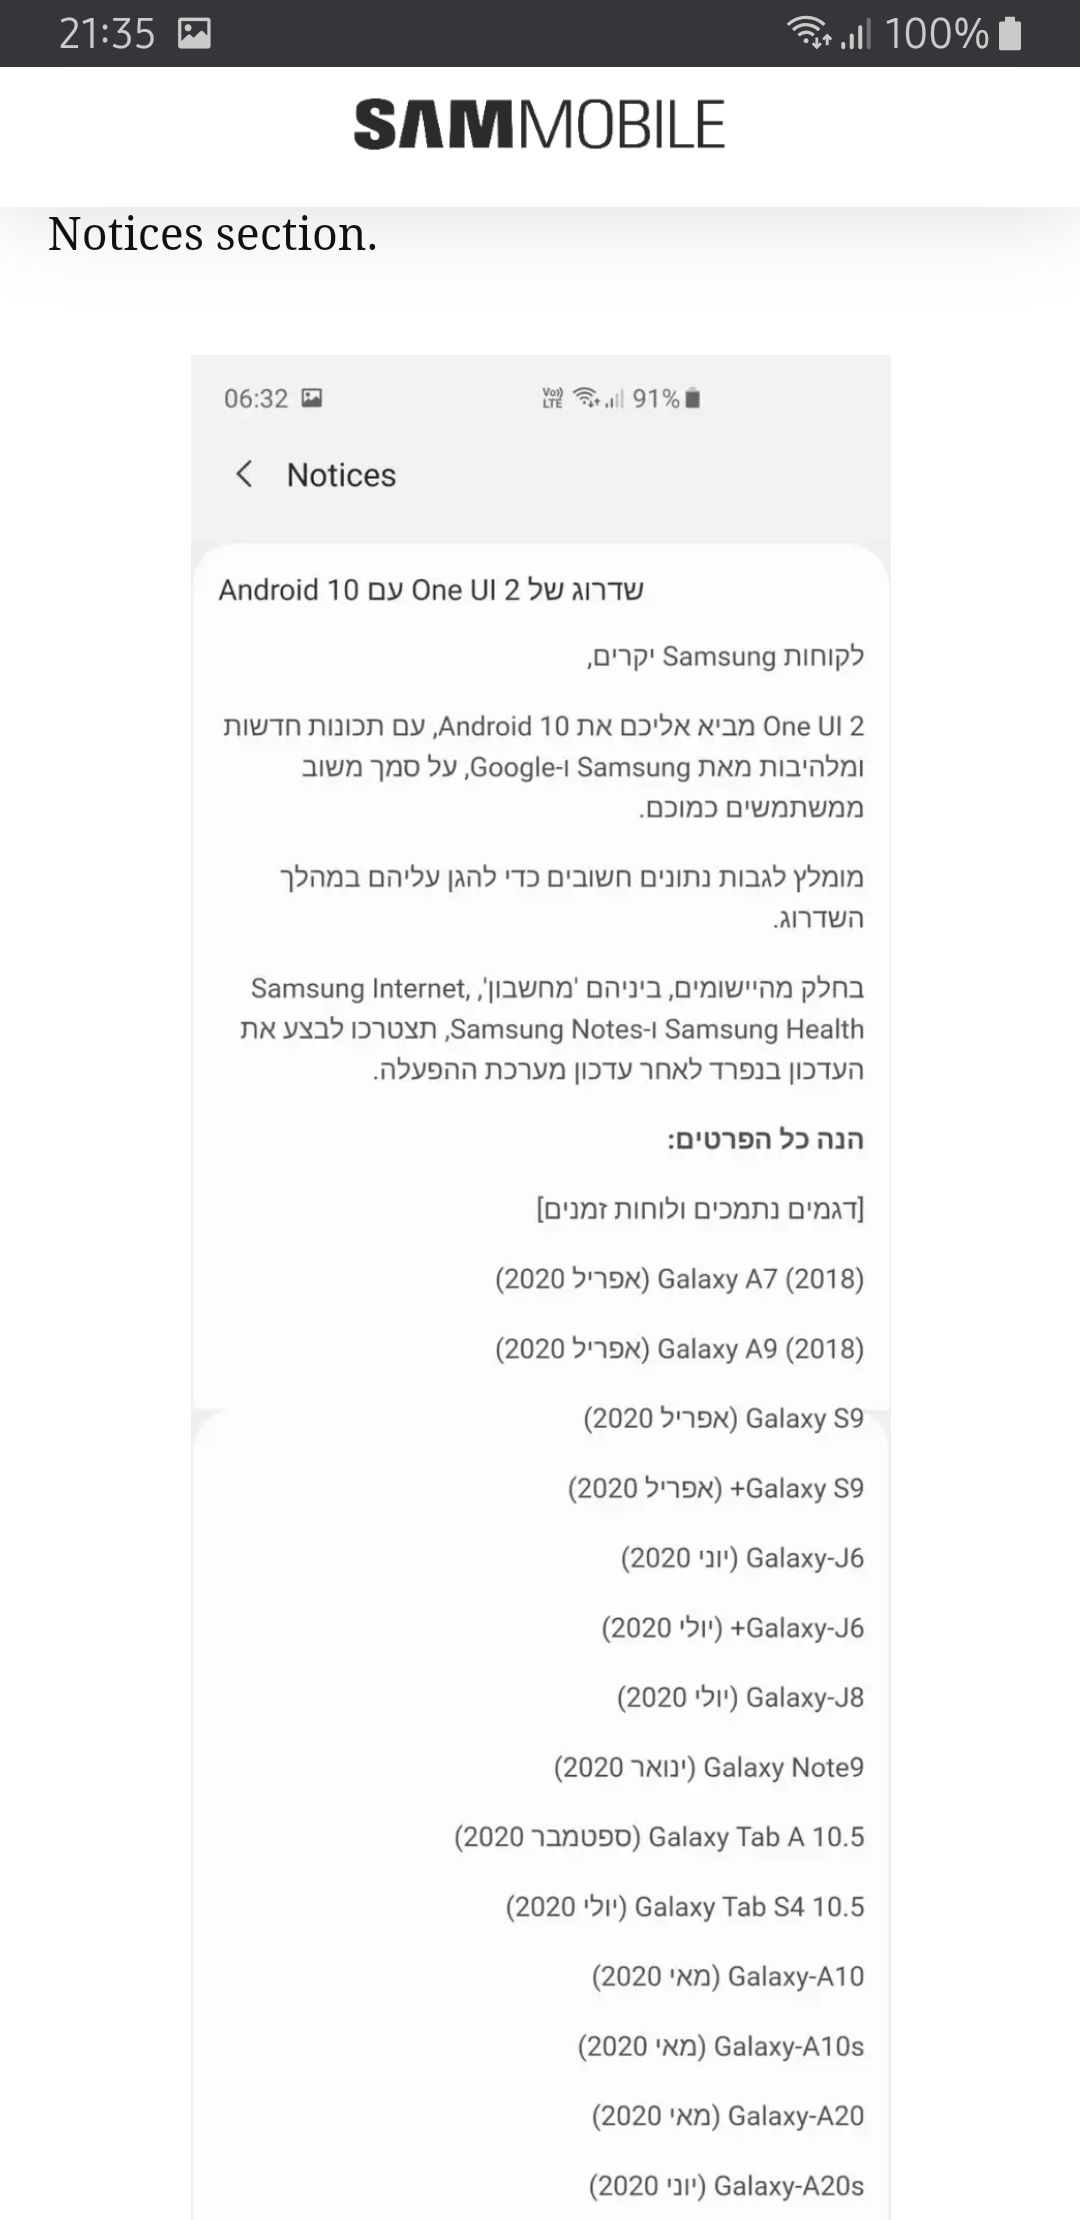 Galaxy A8 2018 MUST Get Android 10 - Petition - Page 5 - Samsung Community